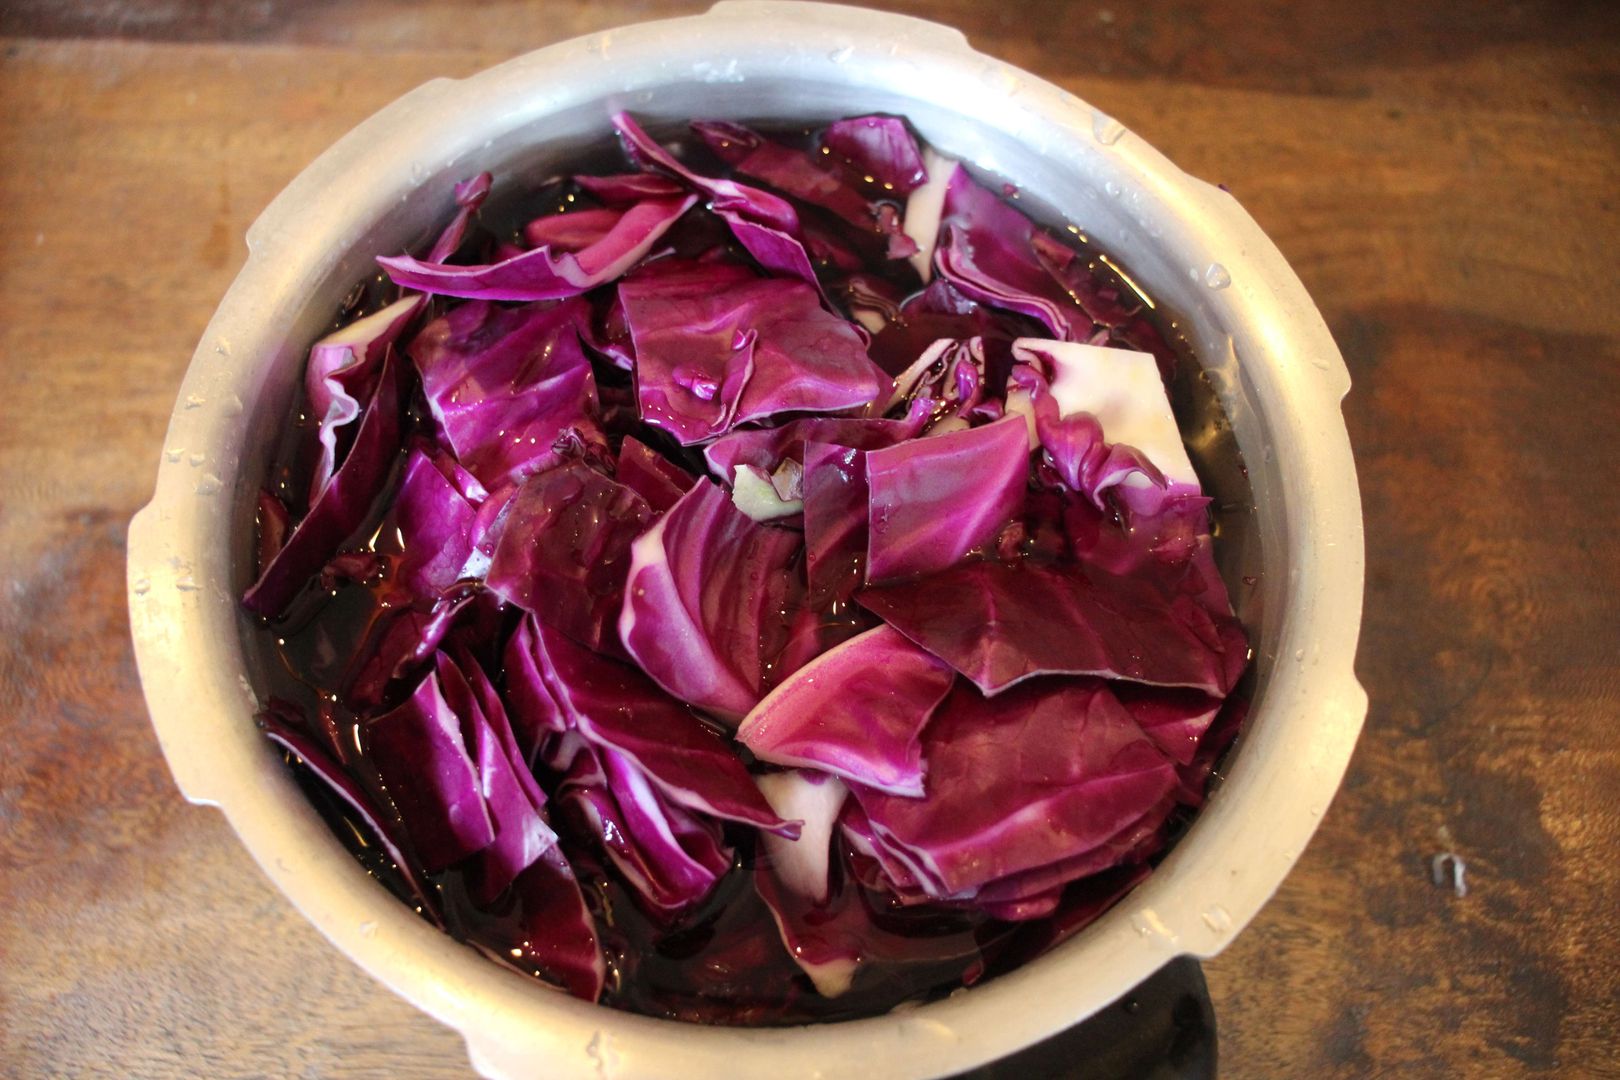 HOW TO MAKE NATURAL DYE WITH RED CABBAGE, ORGANIC COLOR